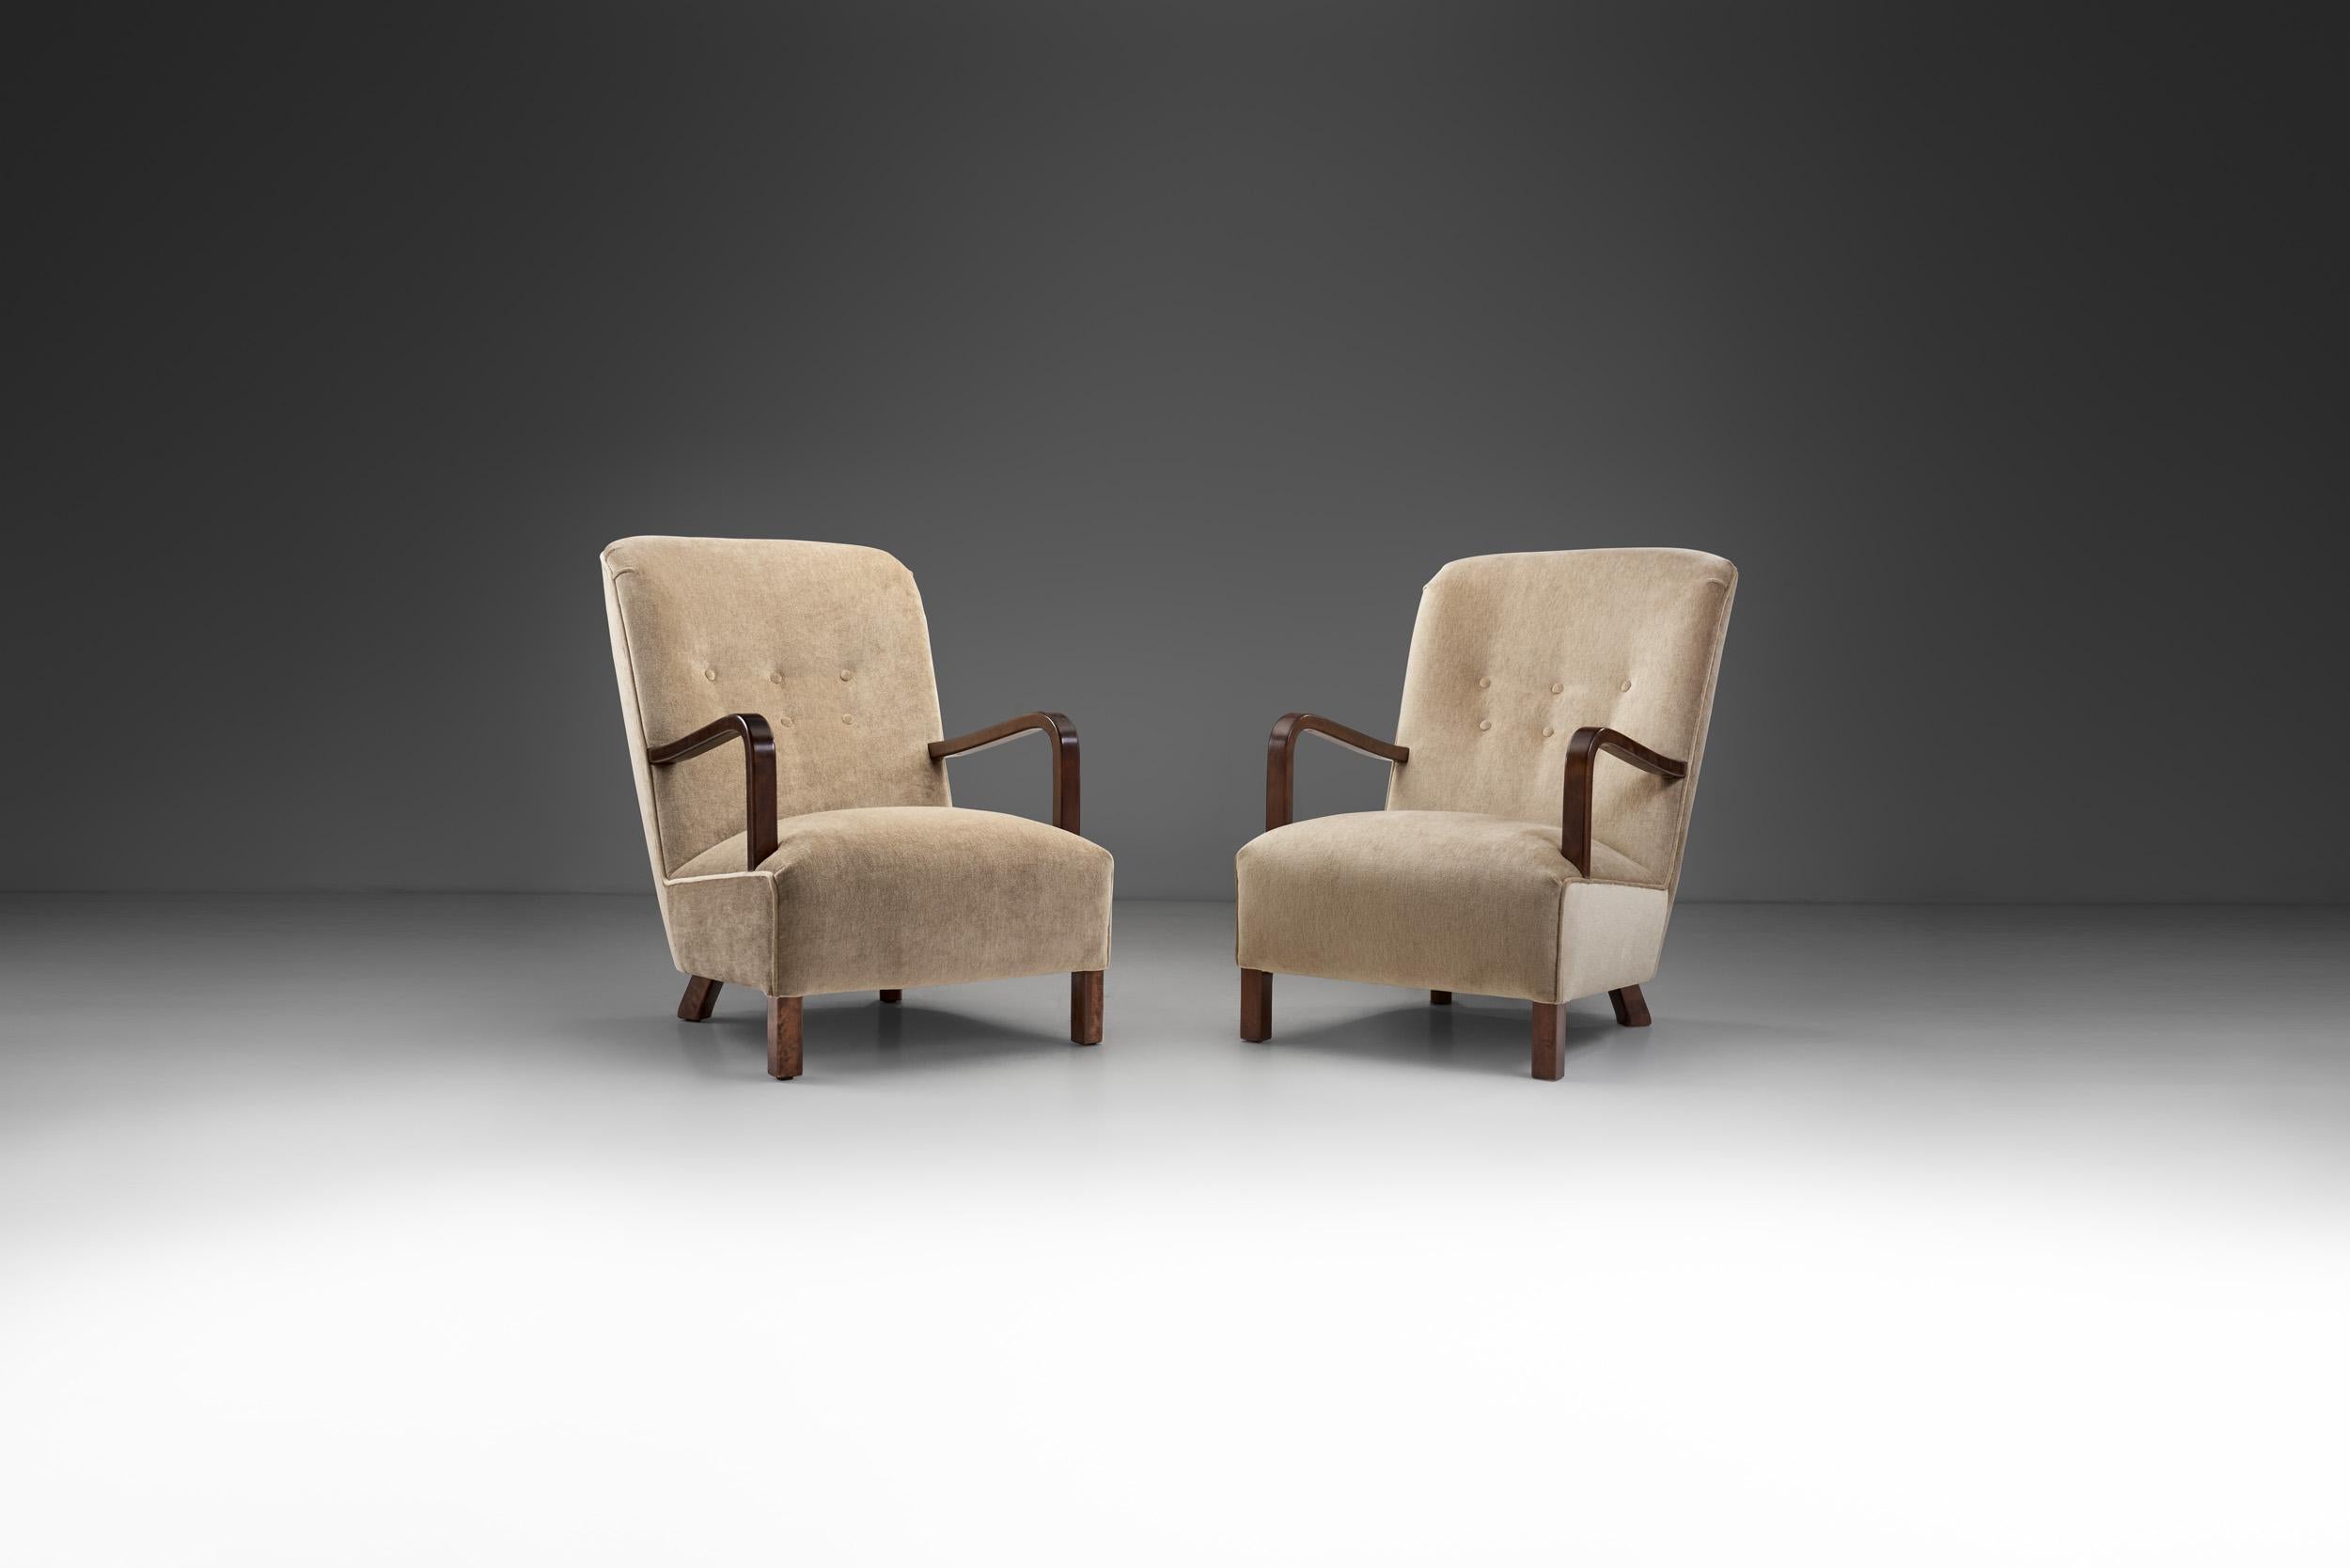 This elegant pair of lounge chairs is an interesting bridge between the 20th century’s earlier artistic movements like Art Deco, and the modernist movement that was about to shape most of Europe’s furniture design for the coming decades.

Inspired